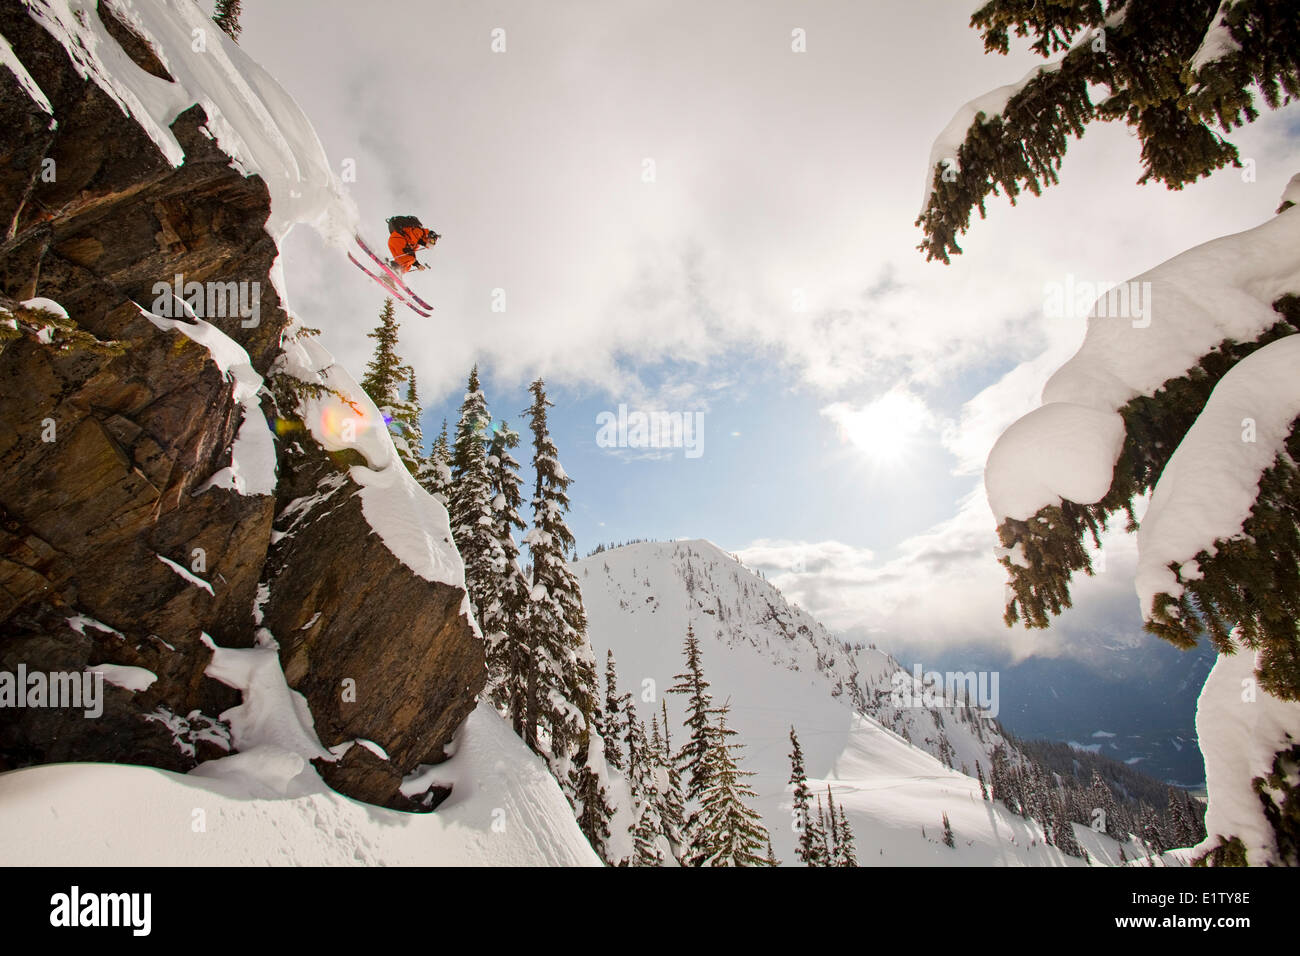 A male freeskier drops a cliff in the backcountry at Revelstoke Mtn Resort Backcountry, BC Stock Photo